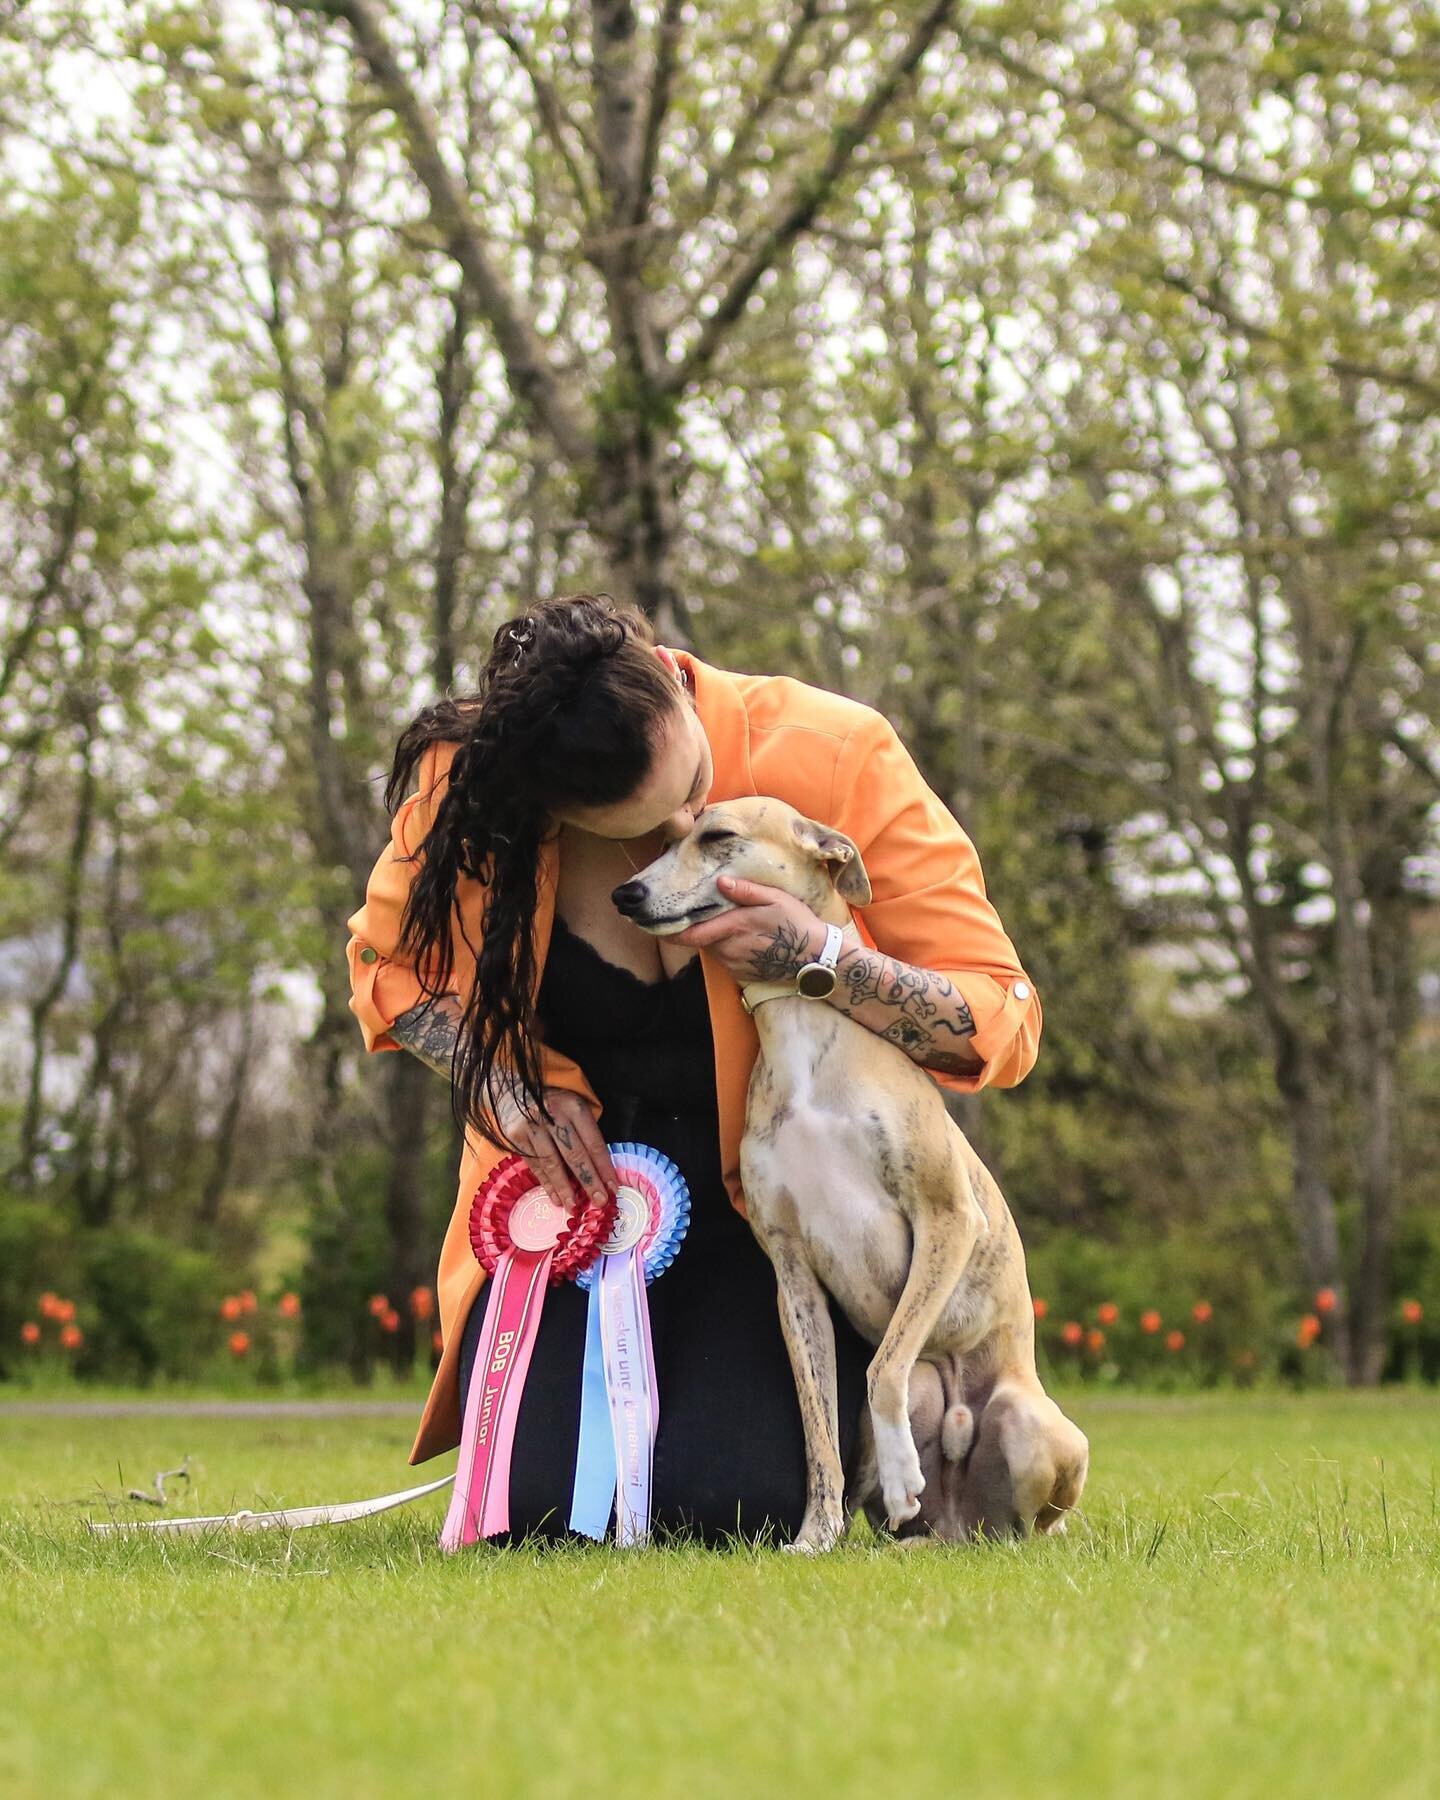 WHAT a show weekend for &Aacute;syrju hound kennel 🇮🇸🏆

Antonio Russian Fata Morgana 🇭🇺 Tony - 17 months - Whippet 

Finished this weekend off with two BOB Juniors, 3.best male/4.best male and is now an Icelandic Junior Champion 🤩🏆He also was 